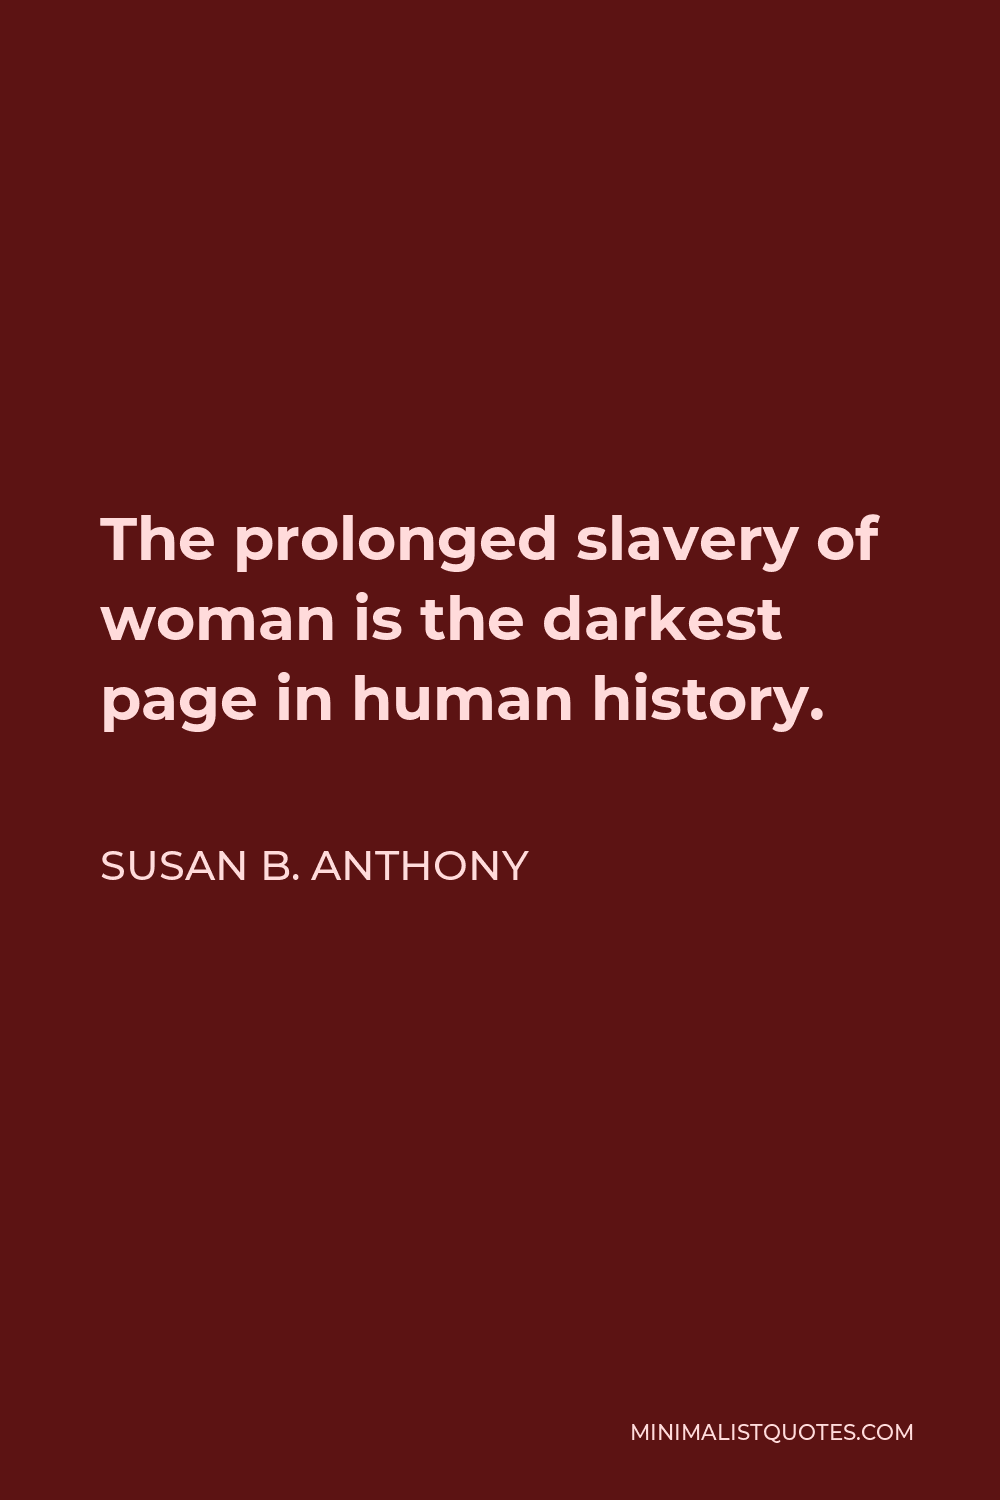 Elizabeth Cady Stanton Quote - The prolonged slavery of woman is the darkest page in human history.